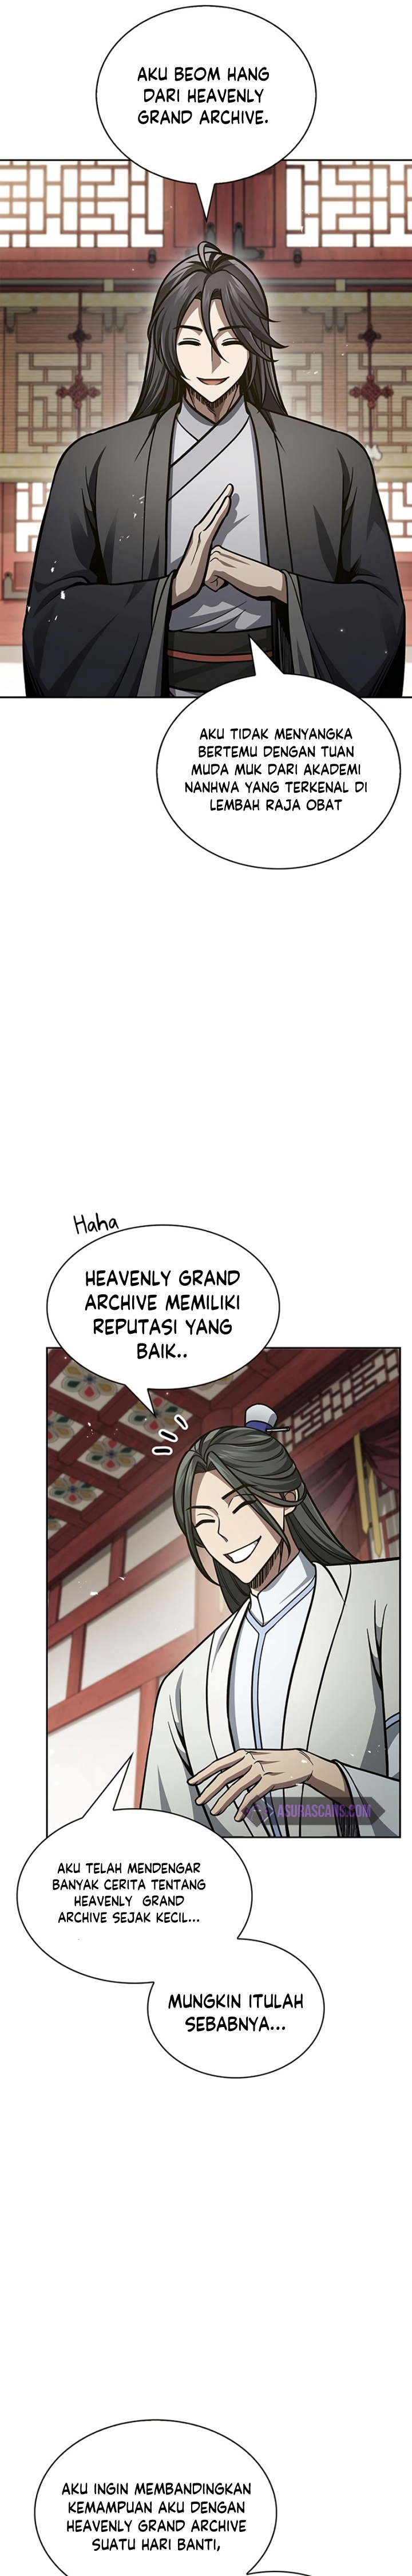 Heavenly Grand Archive’s Young Master Chapter 38